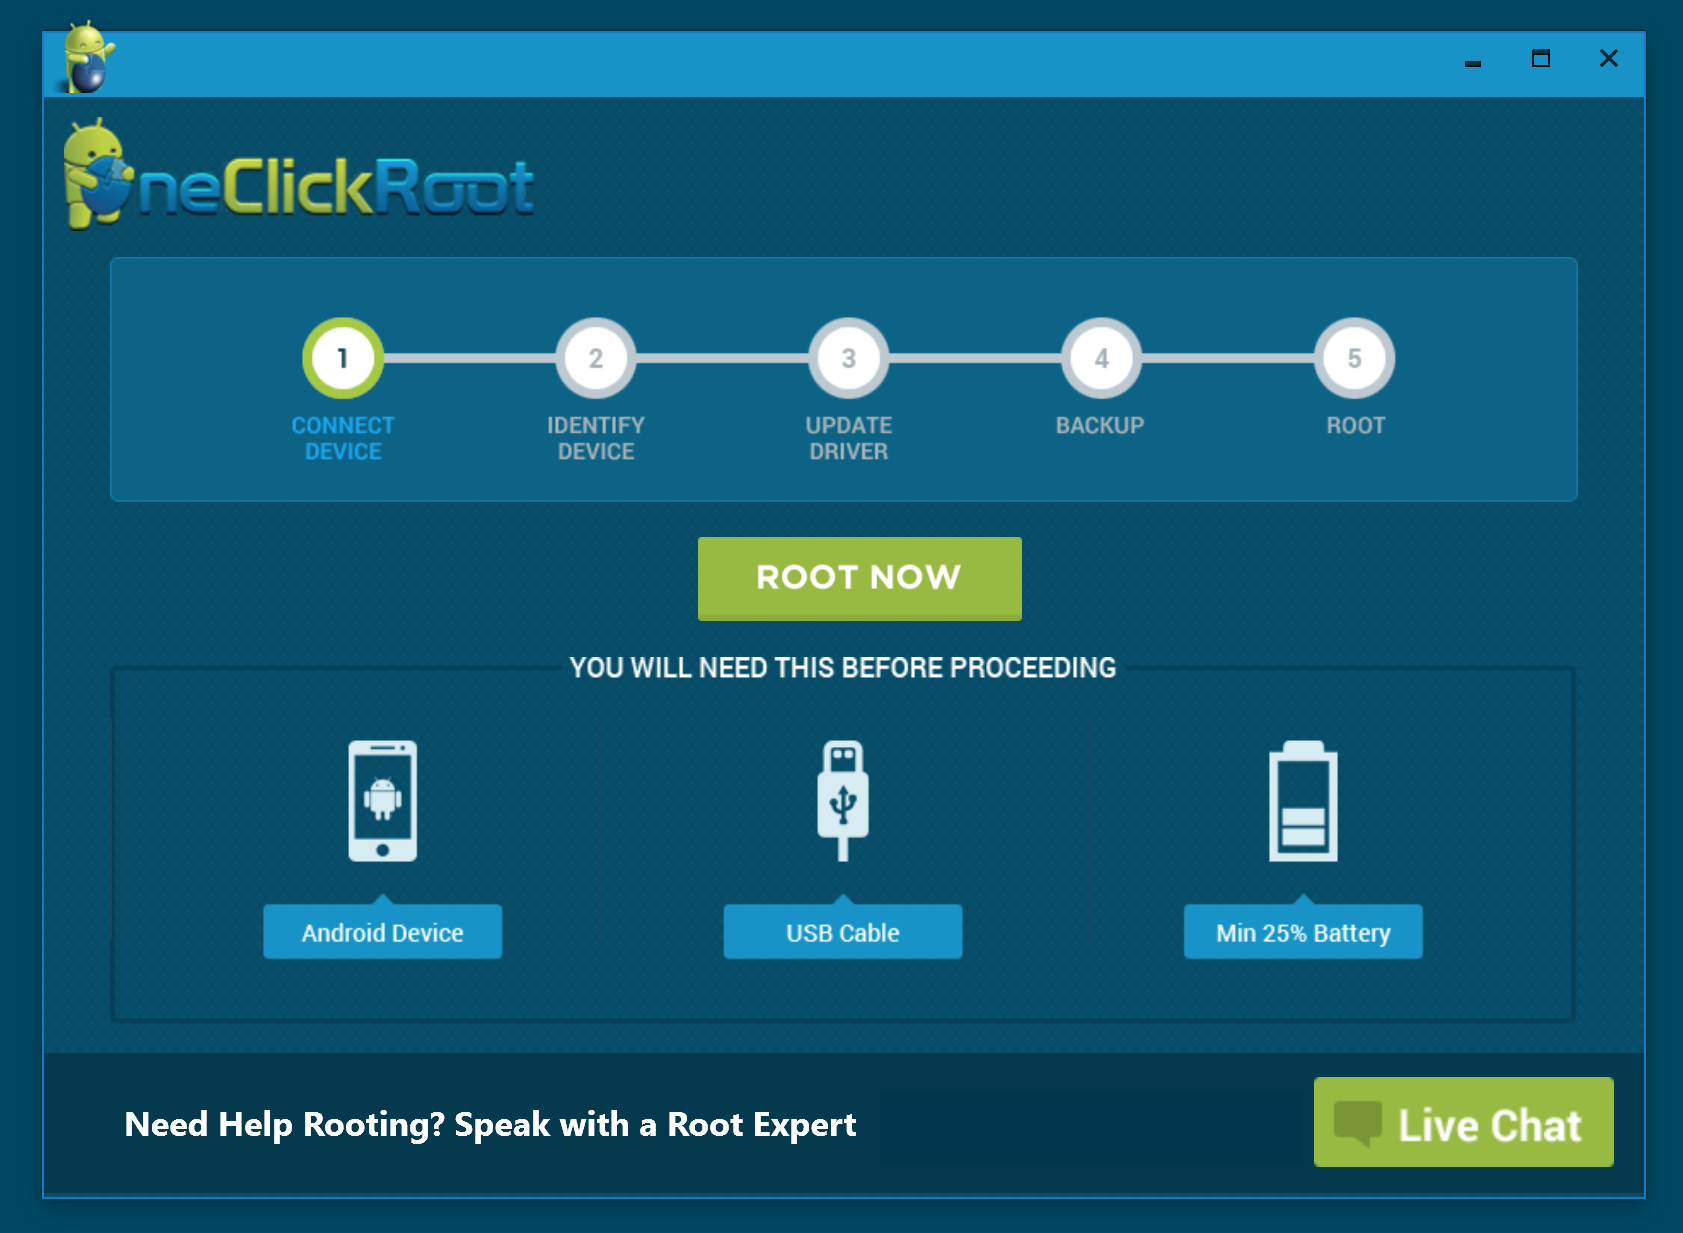 One Click Root Free Trial